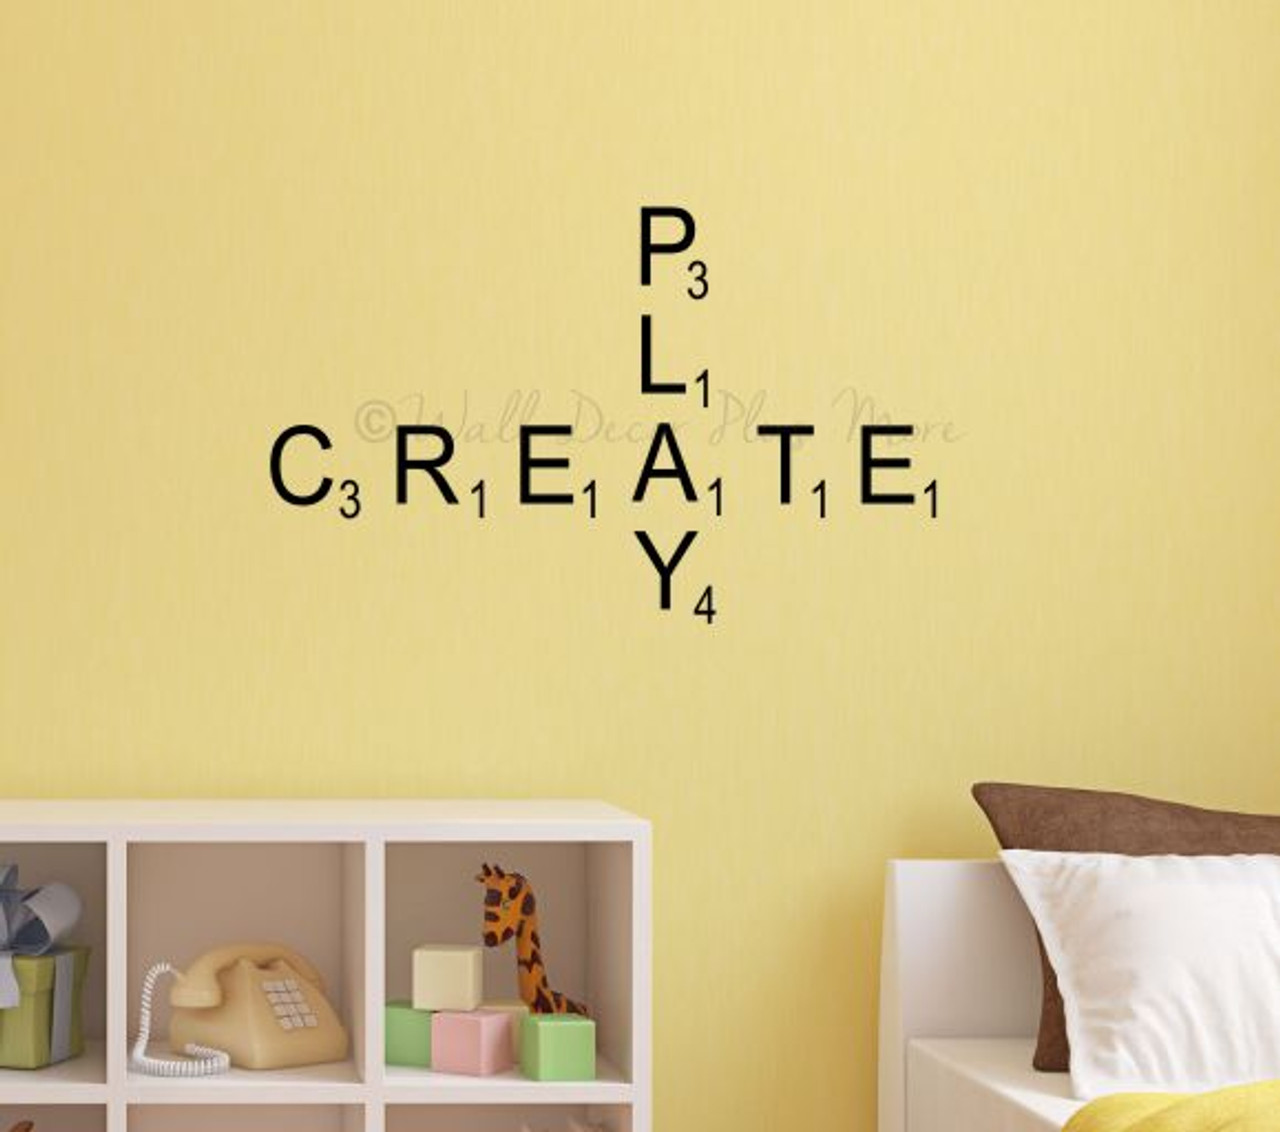 Scrabble Tiles Vinyl Sticker Letters Personalized Wall Decals for Home Decor